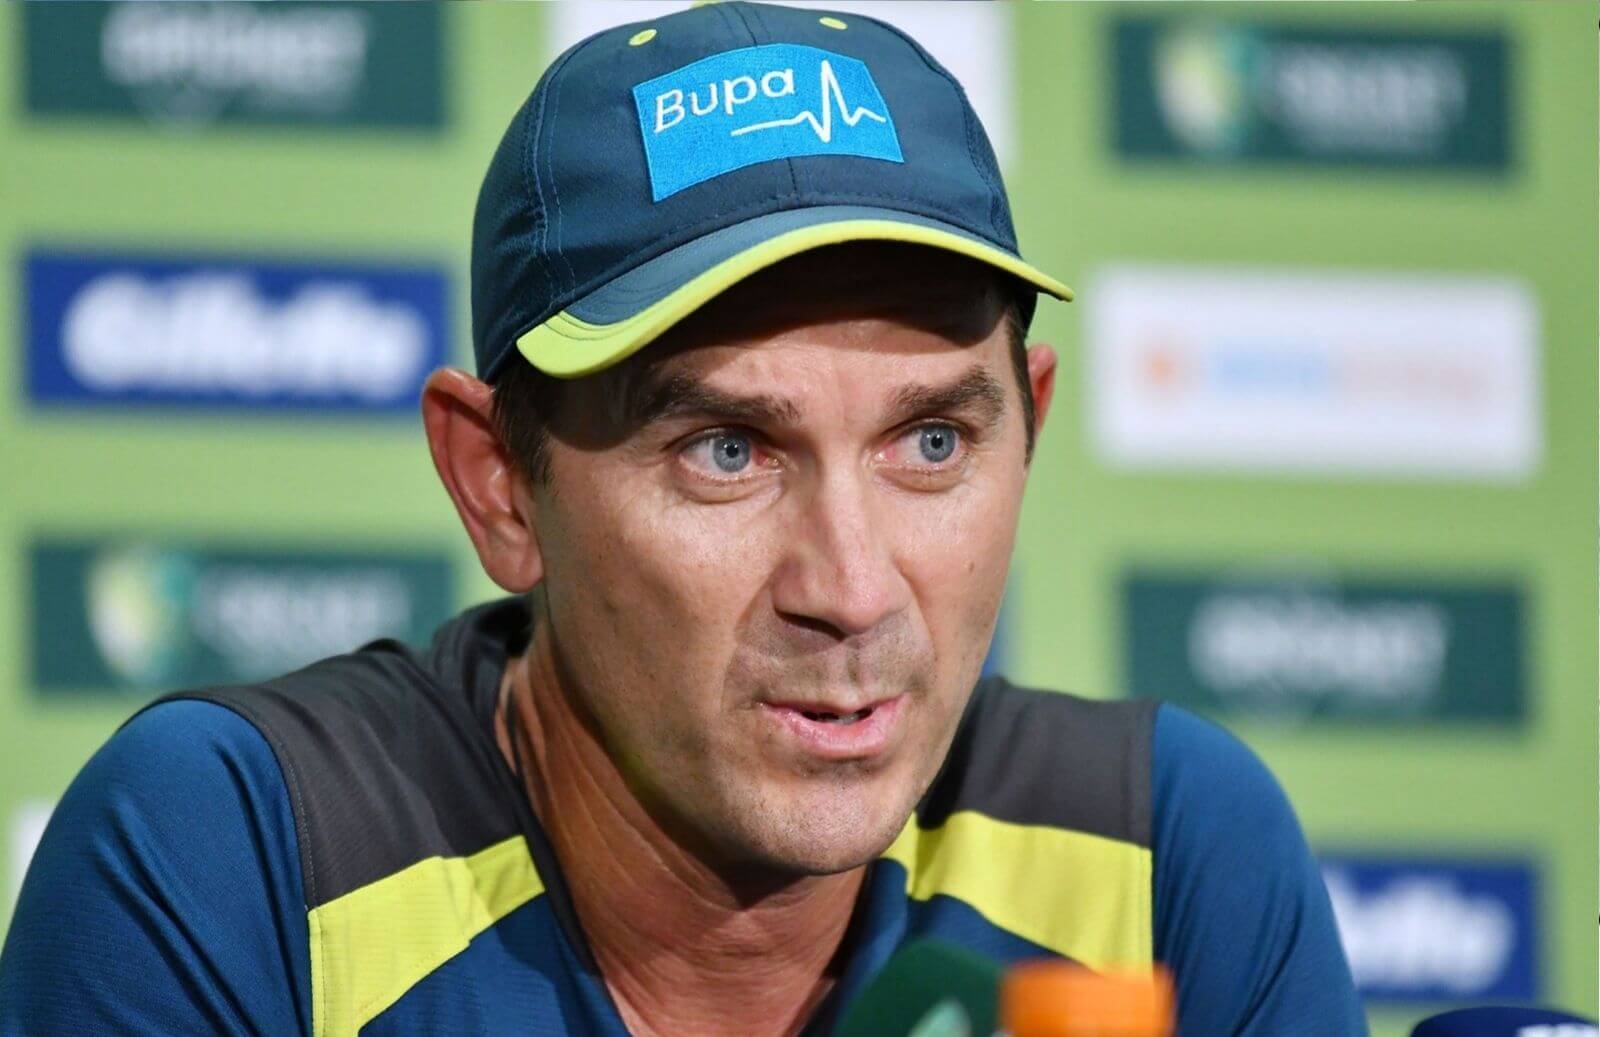 IND vs AUS: Justin Langer Confirms Australia's Playing XI For Boxing Day Test. Here Is The Team